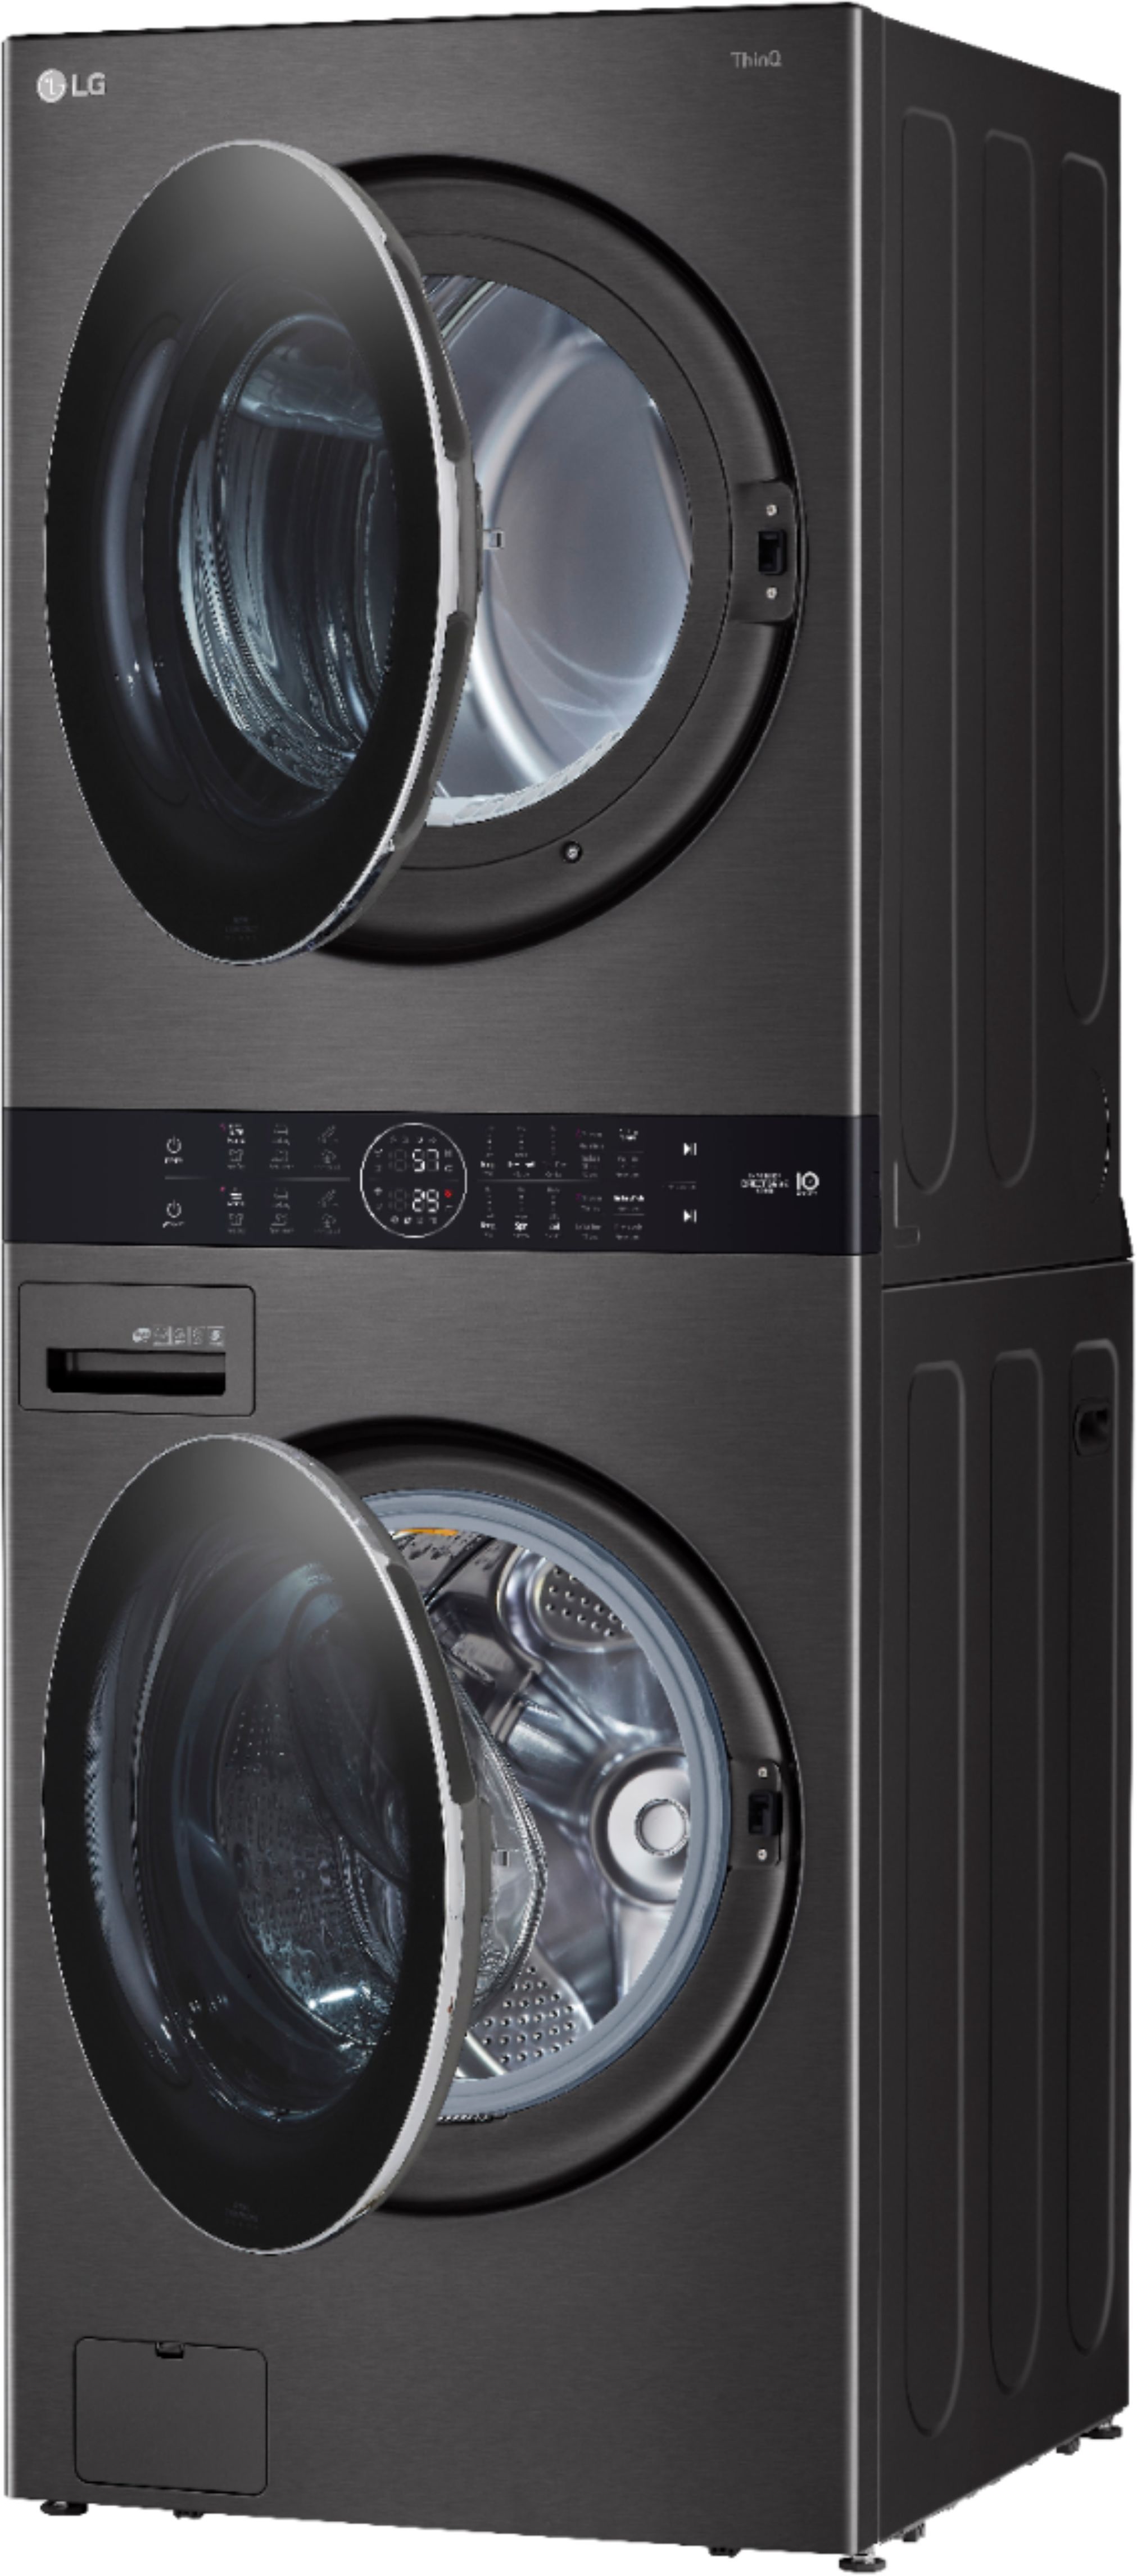 LG 4.5 Cu. WKEX200HBA Front 7.4 Dryer Intelligence Steel Black Ft. Ft. Best Buy Washer Built-In WashTower Steam and Cu. Electric - Load with HE Smart and